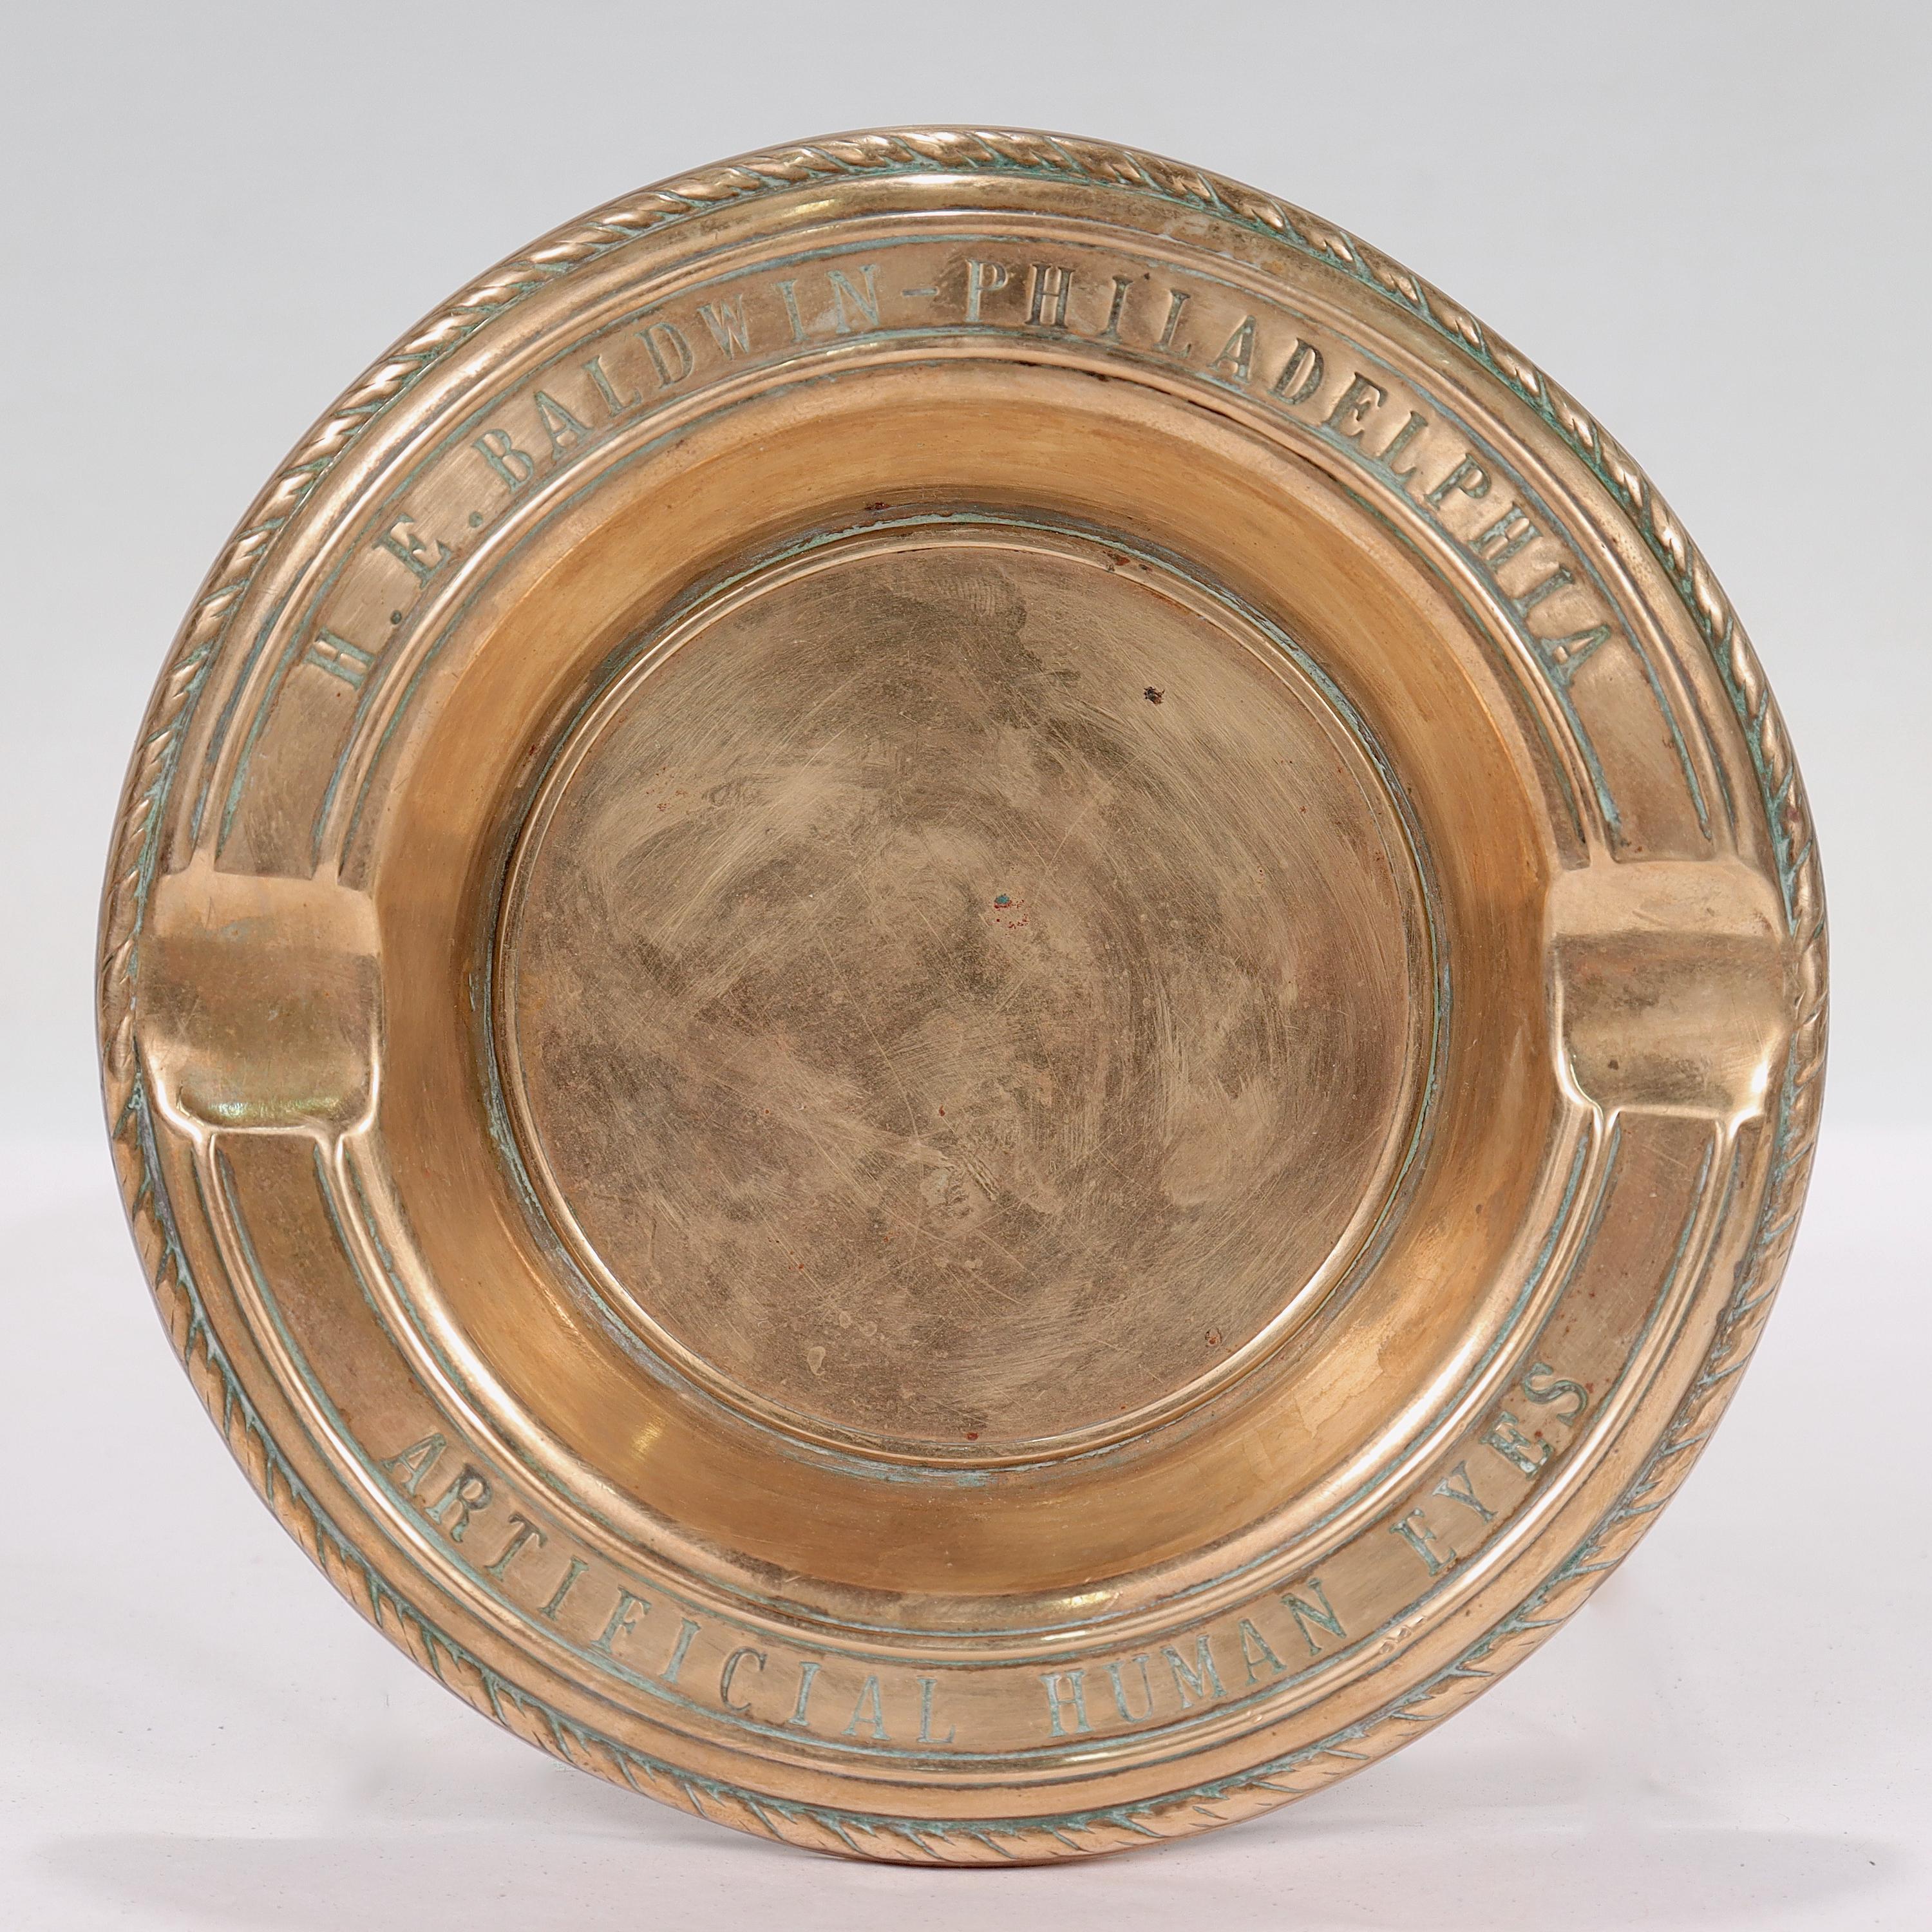 An odd obscura collectible in the form of a rare, antique brass advertising ashtray.

The ashtray is engraved with 